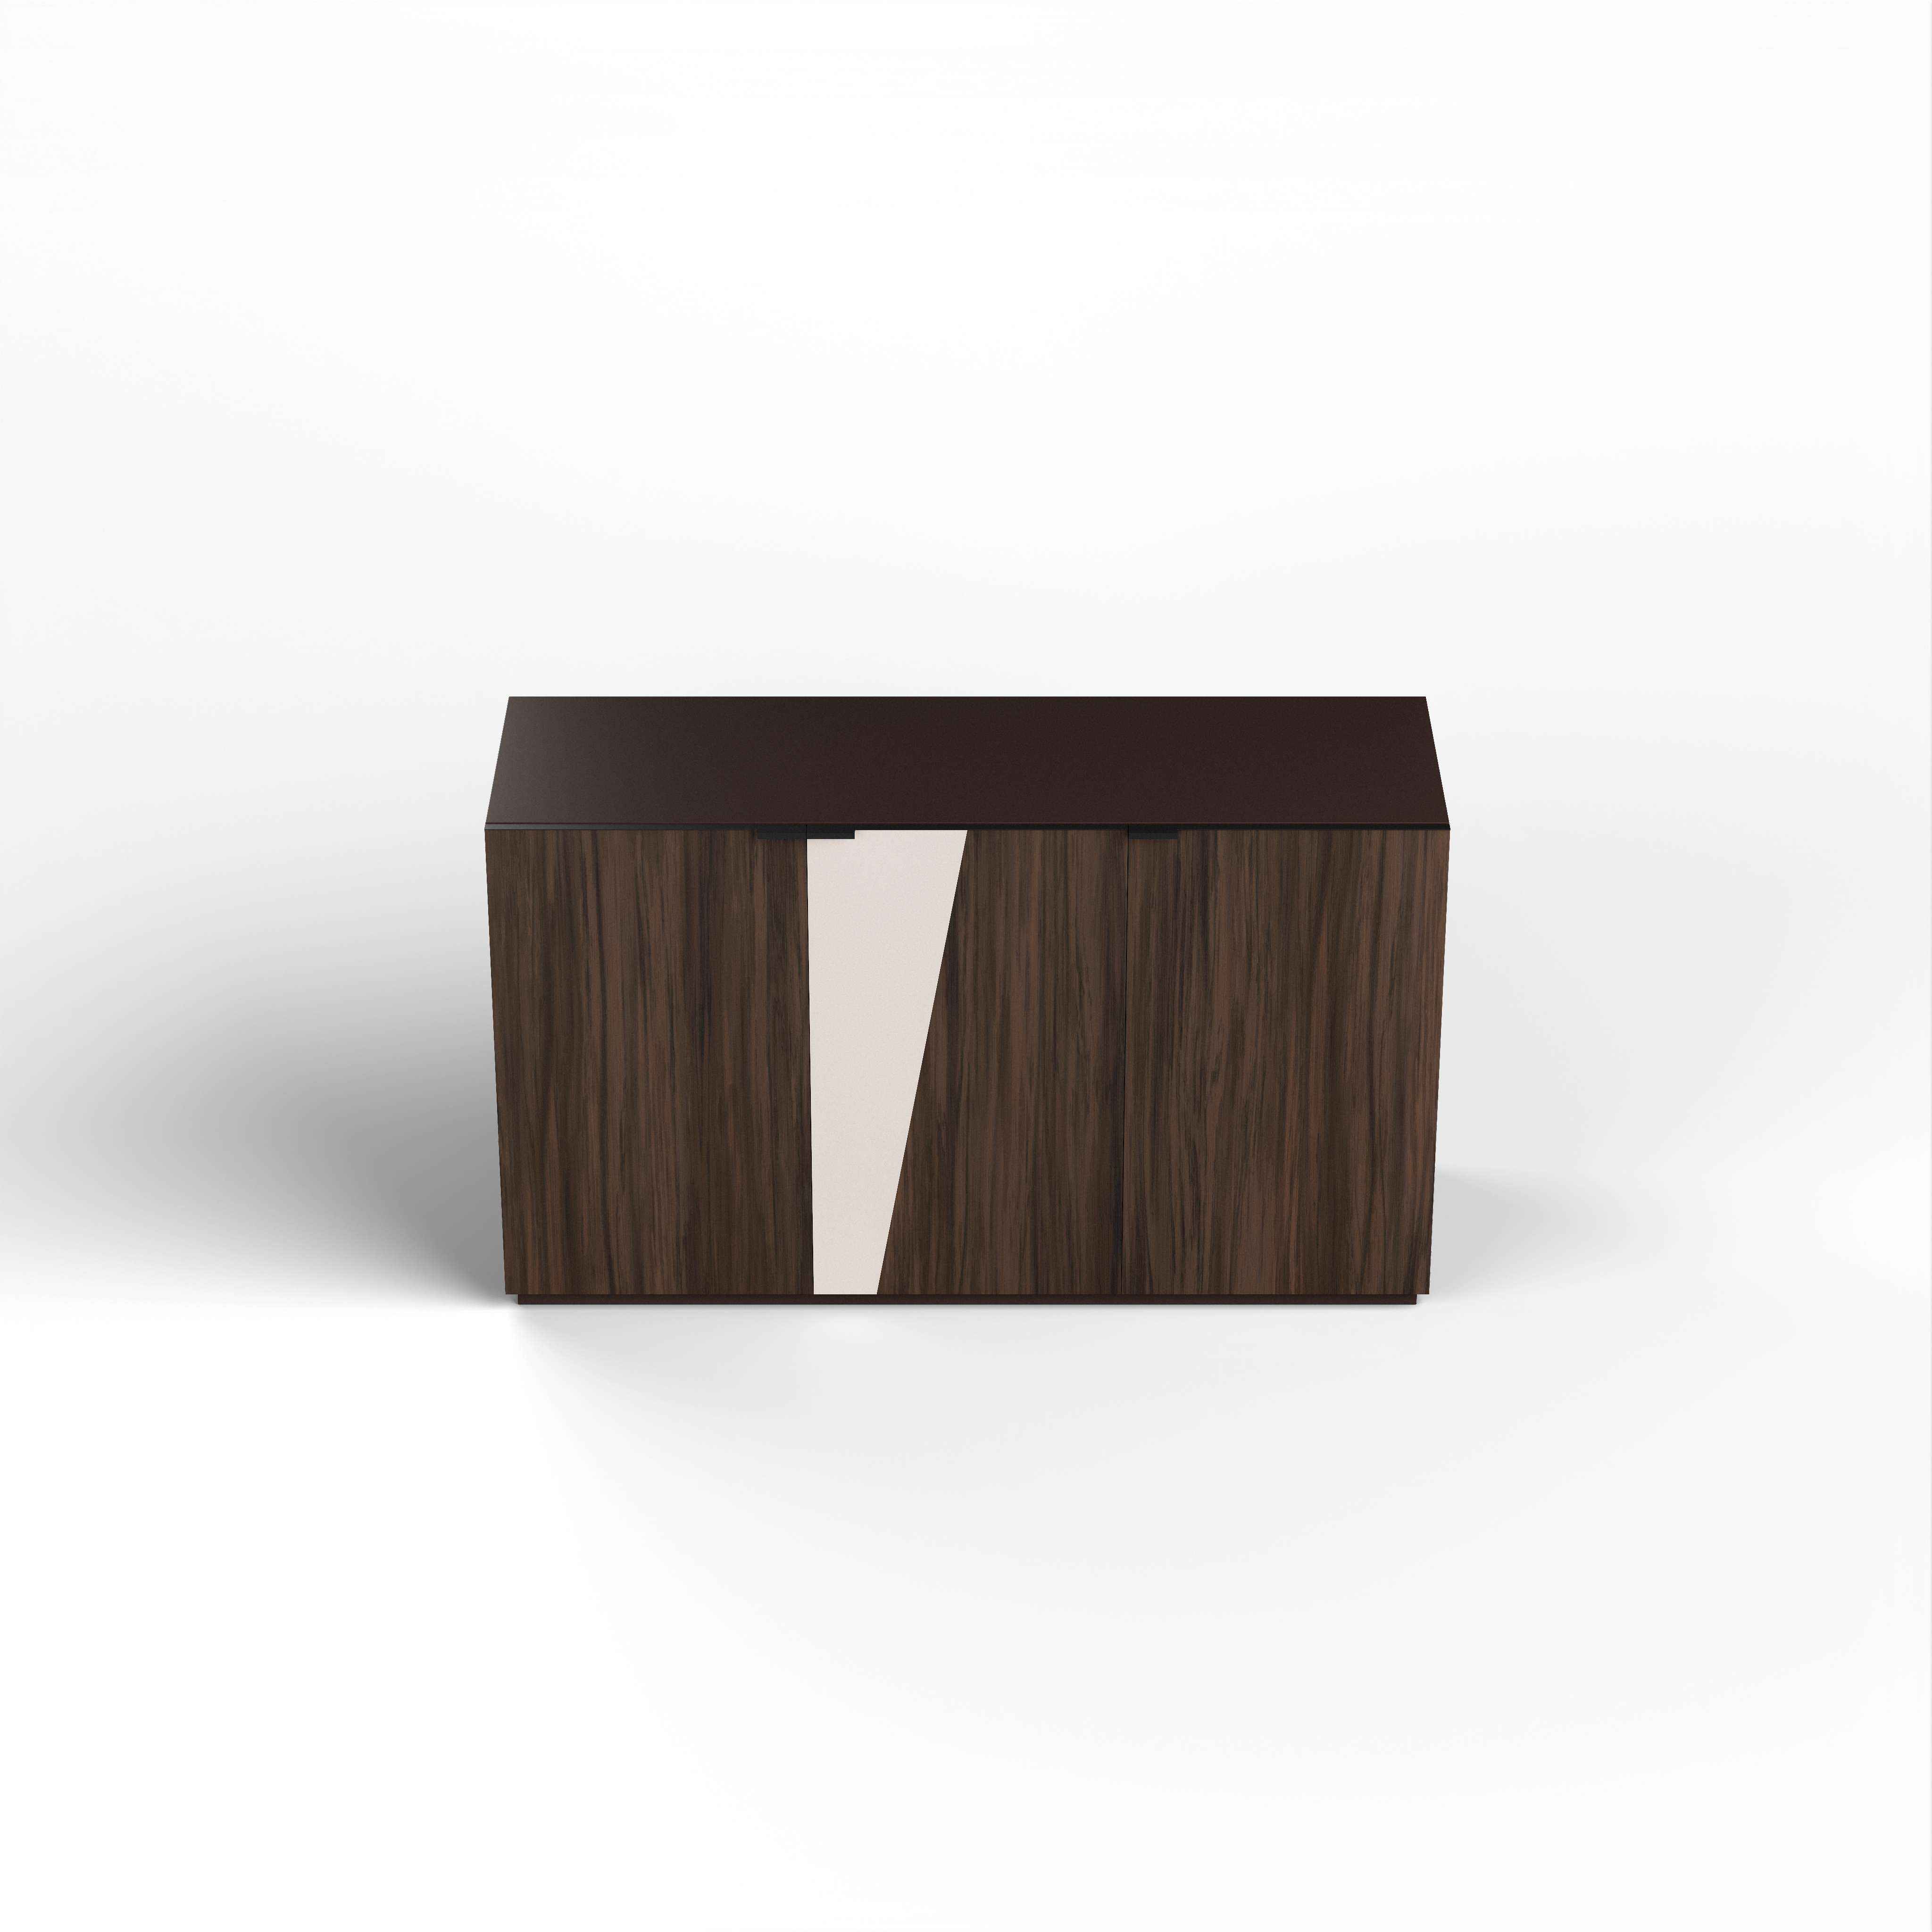 Vilma Justo Chest of Drawers